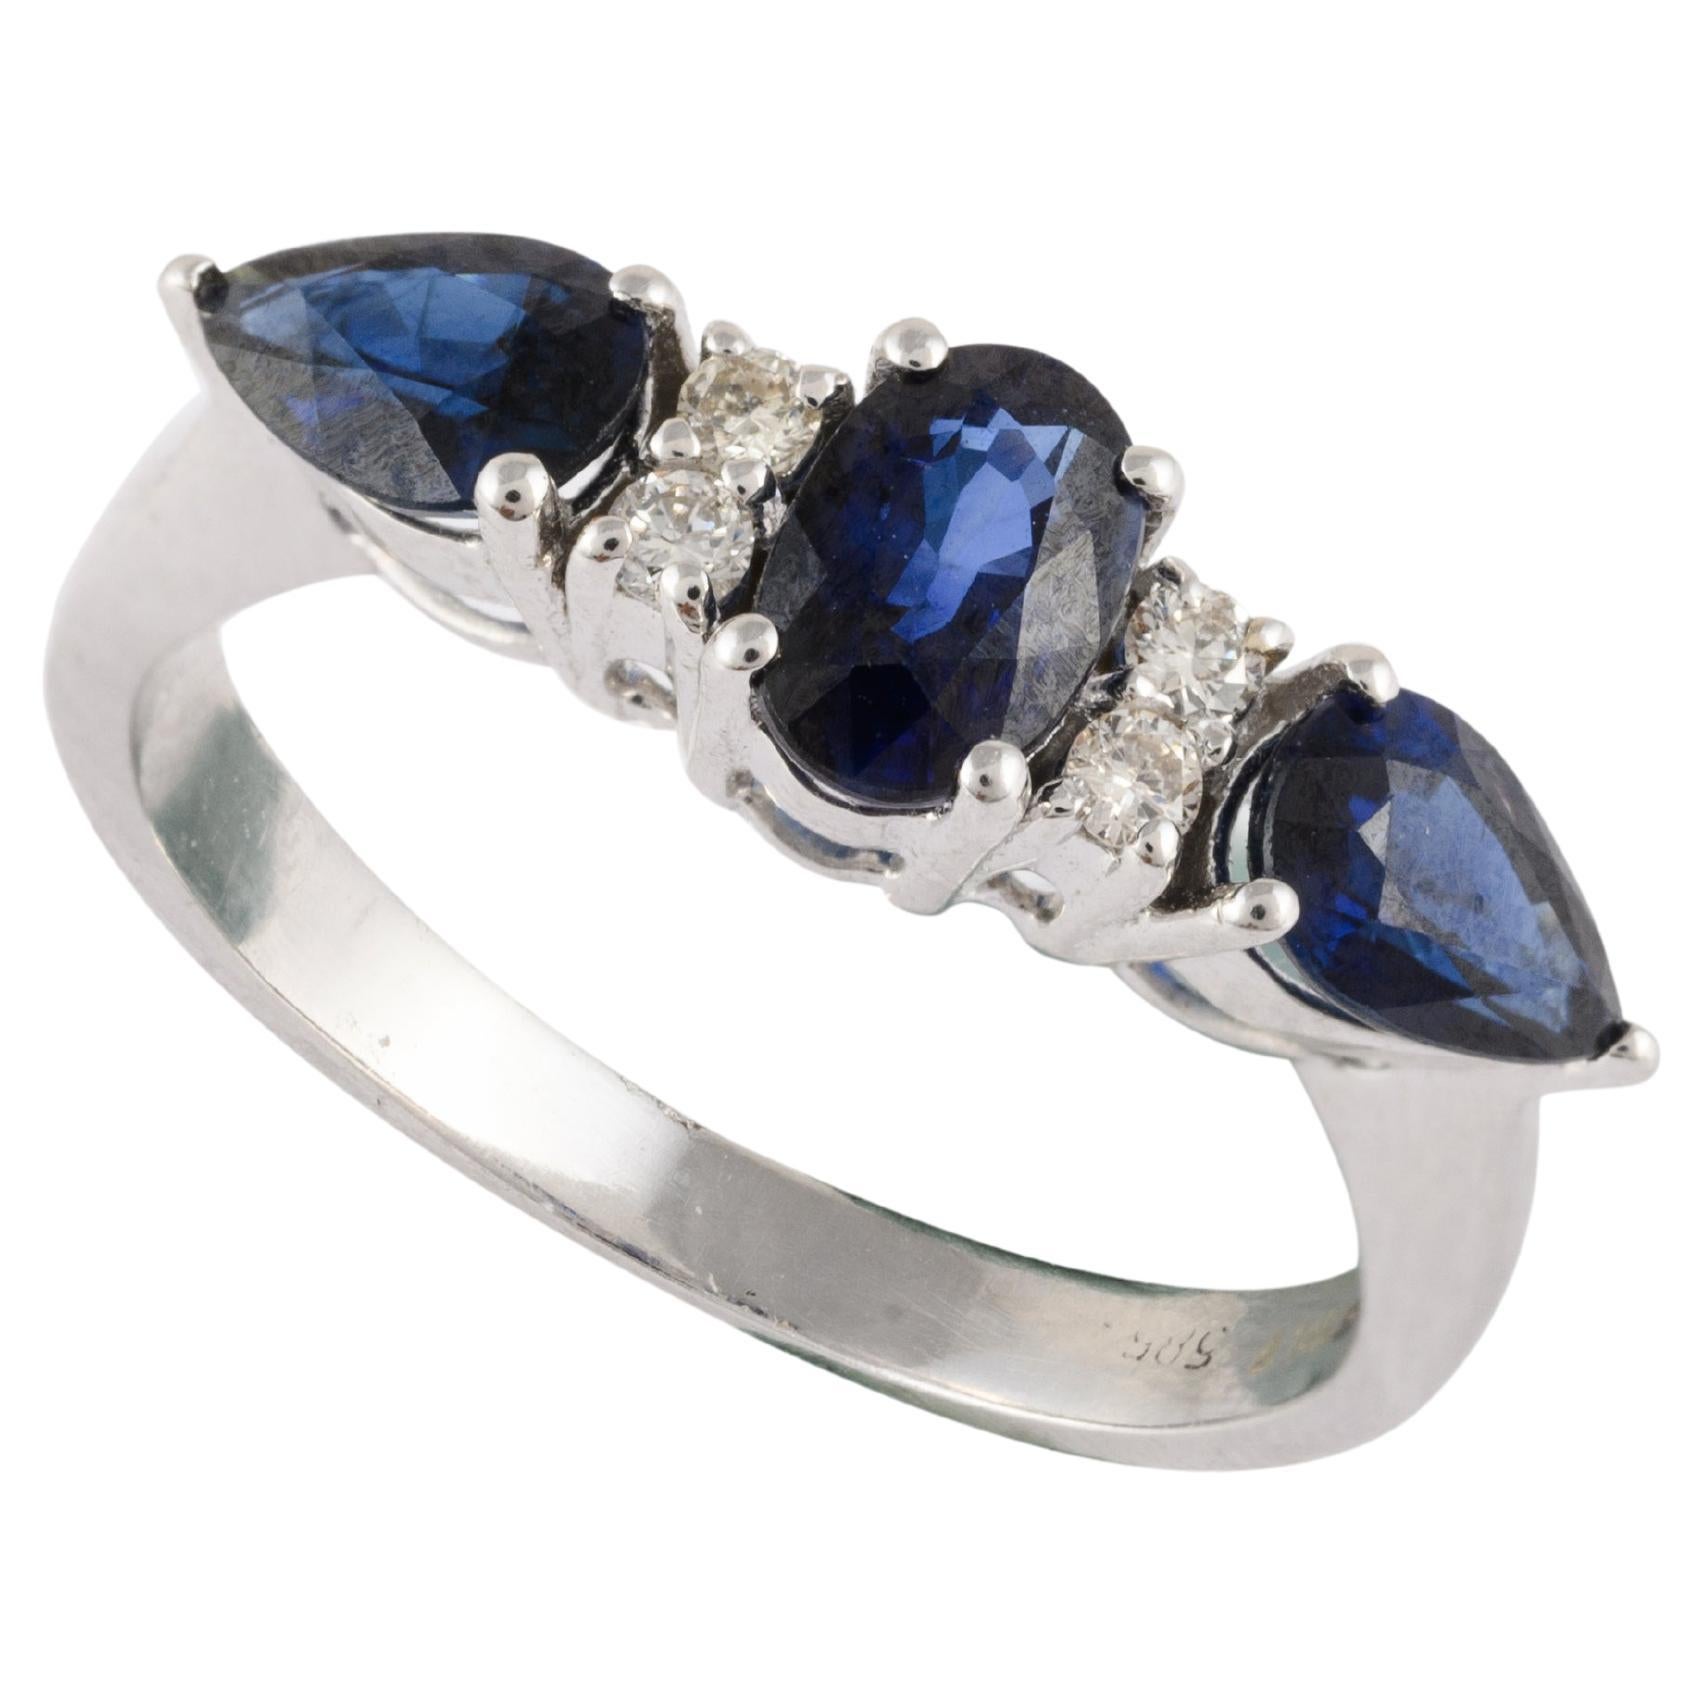 For Sale:  Gorgeous Sapphire Diamond Engagement Ring in 14k Solid White Gold For Her